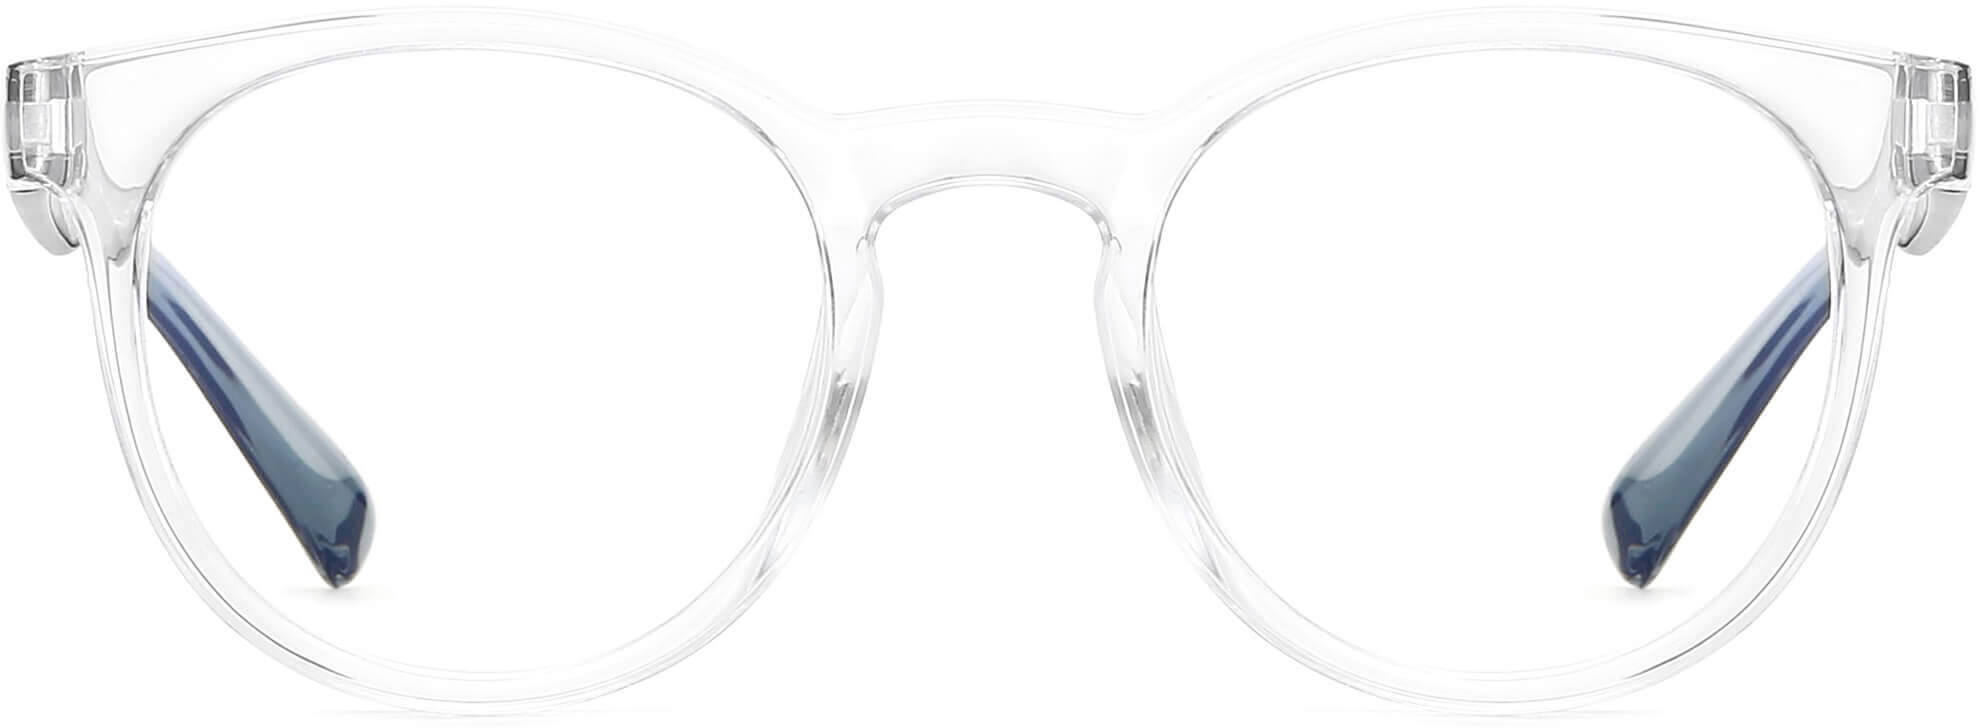 Quintina Round Clear Eyeglasses from ANRRI, front view